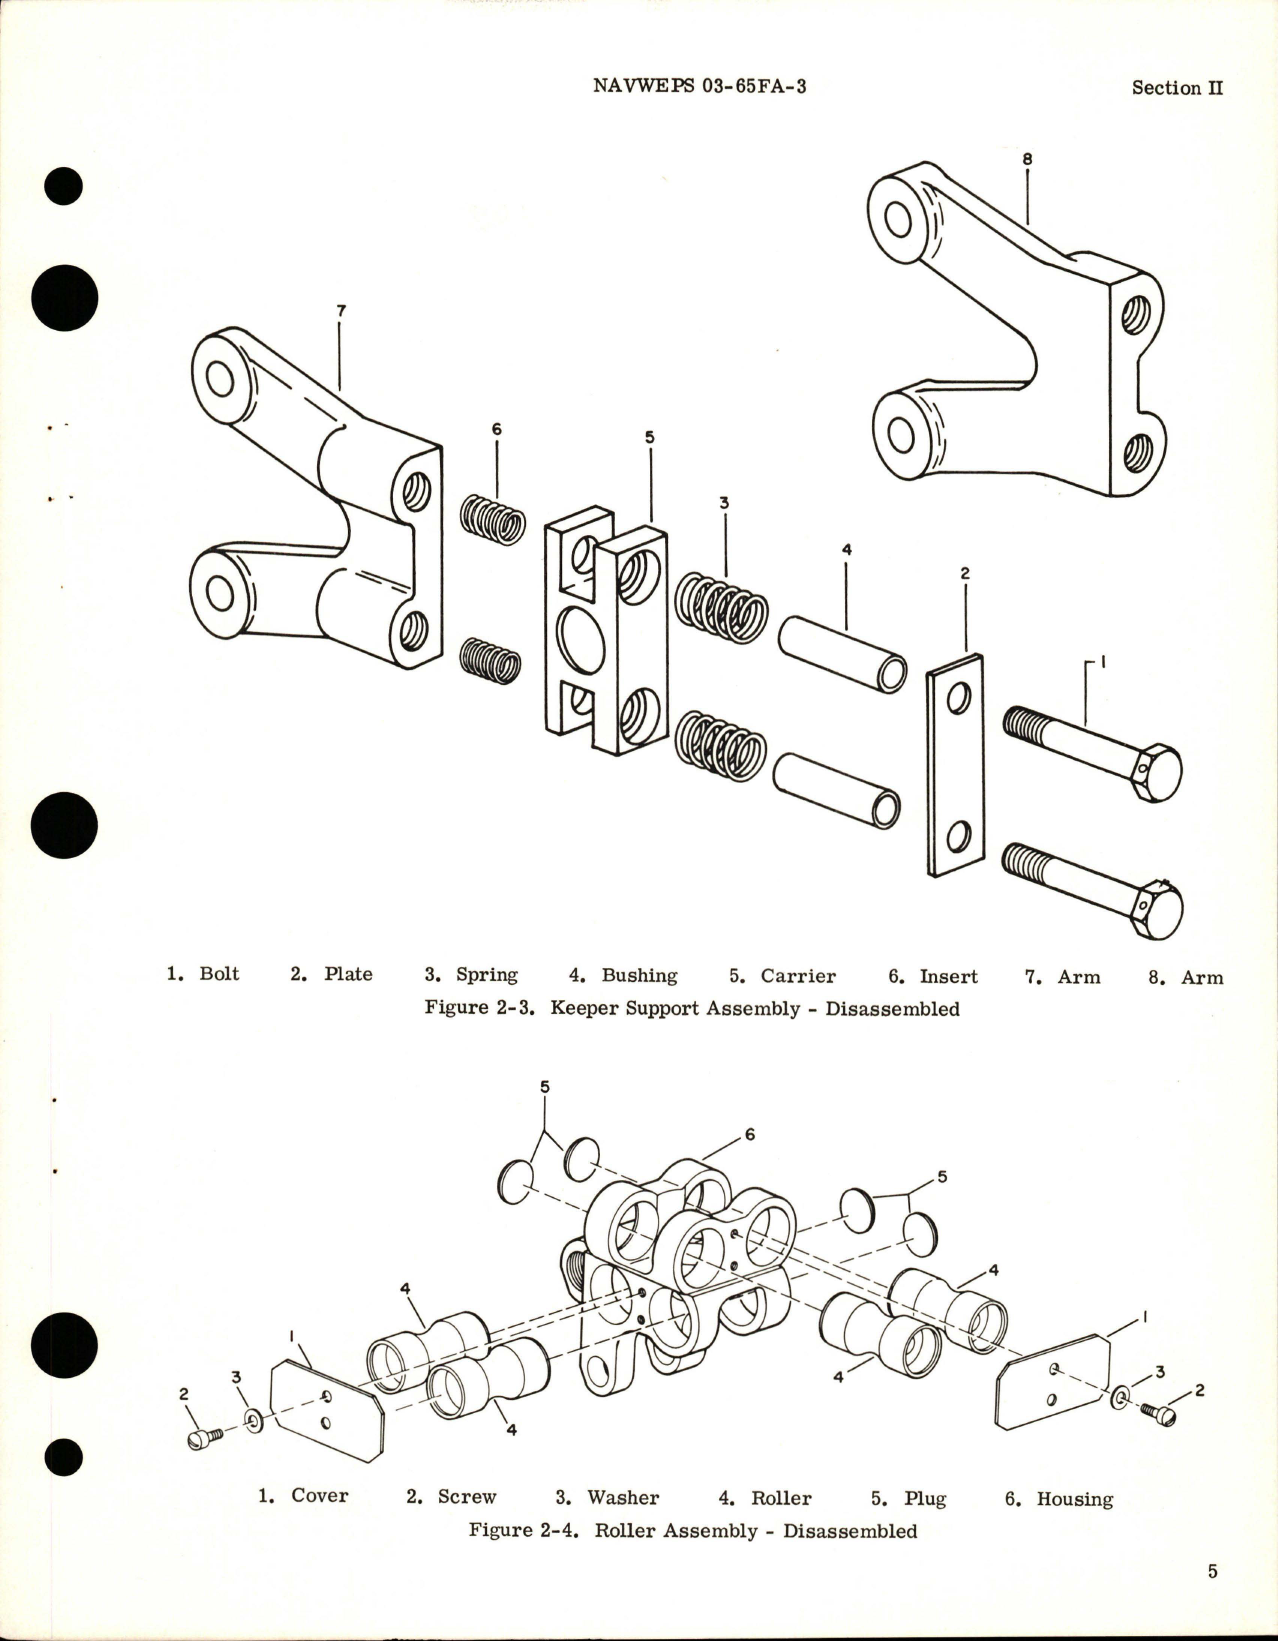 Sample page 9 from AirCorps Library document: Overhaul Instructions for Tow Winch Assembly - Part 172700